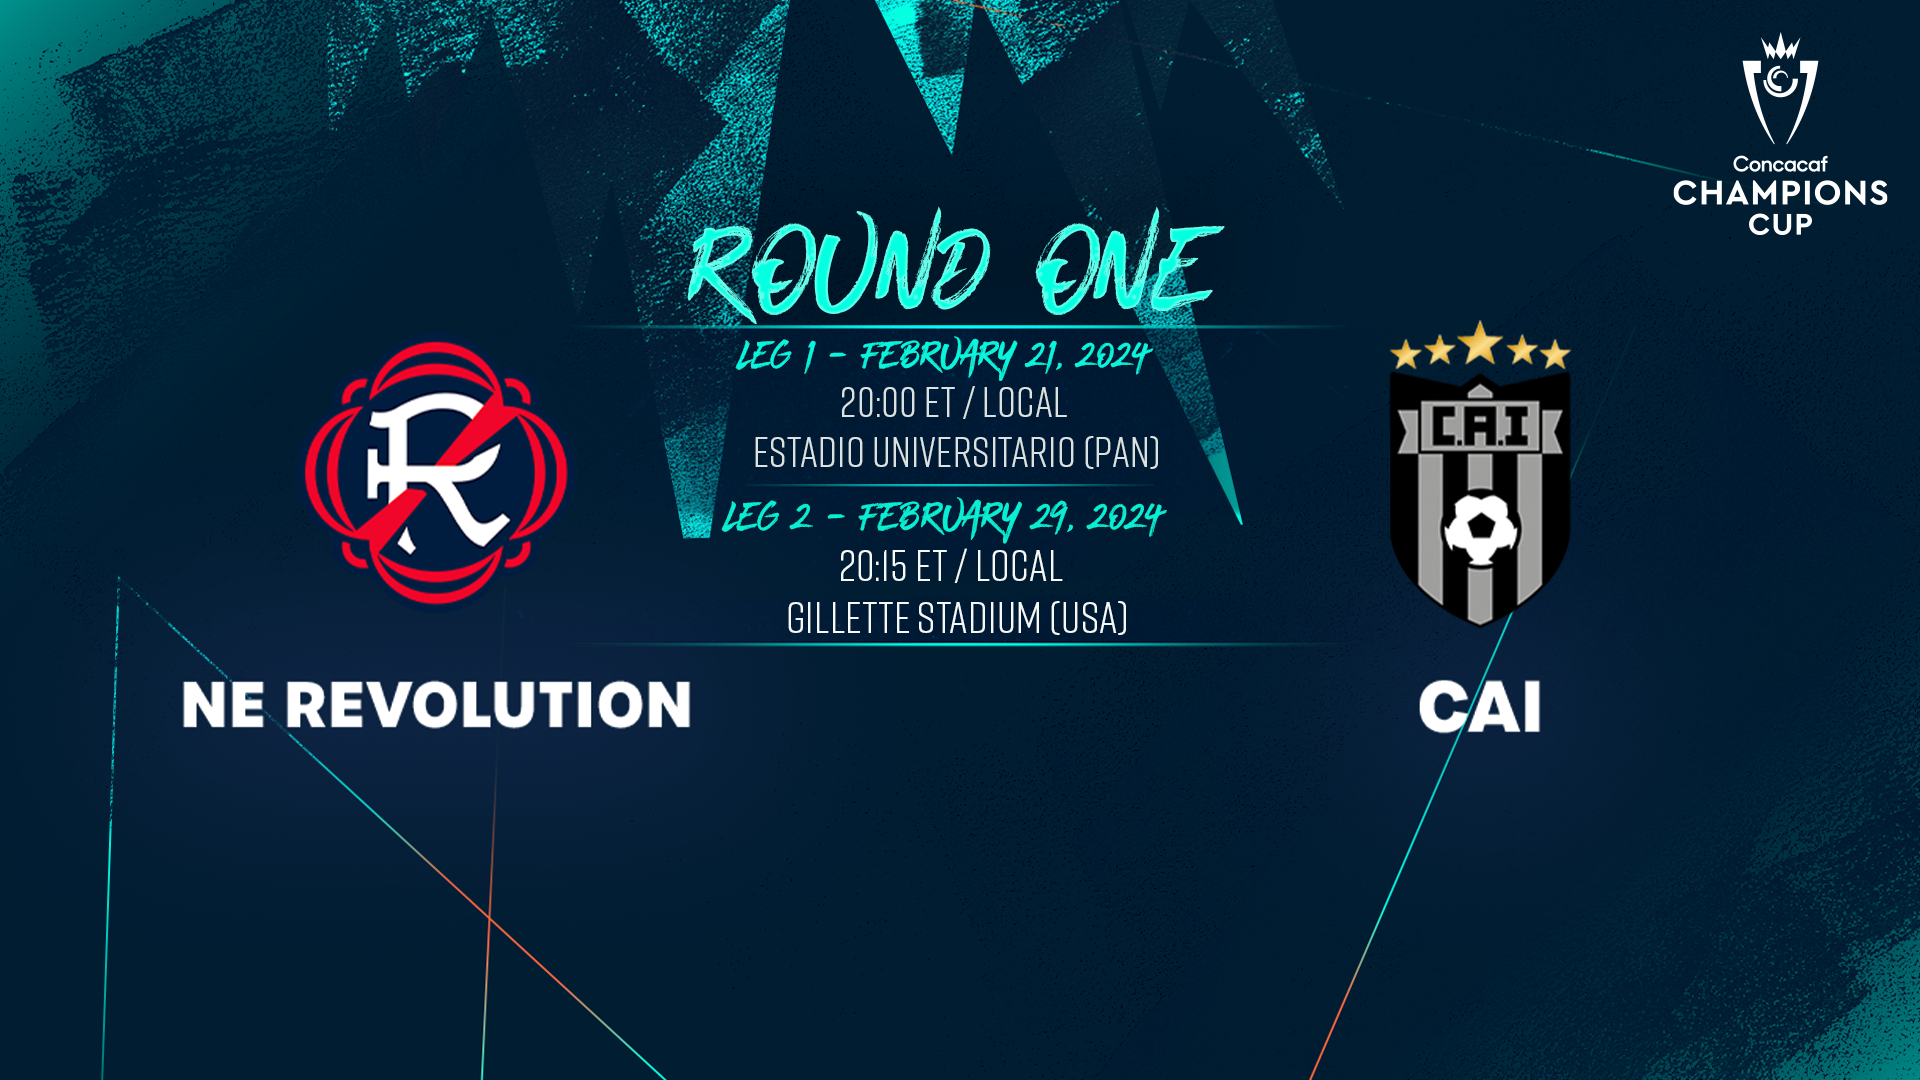 New England Revolution to face CA Independiente in 2024 Concacaf